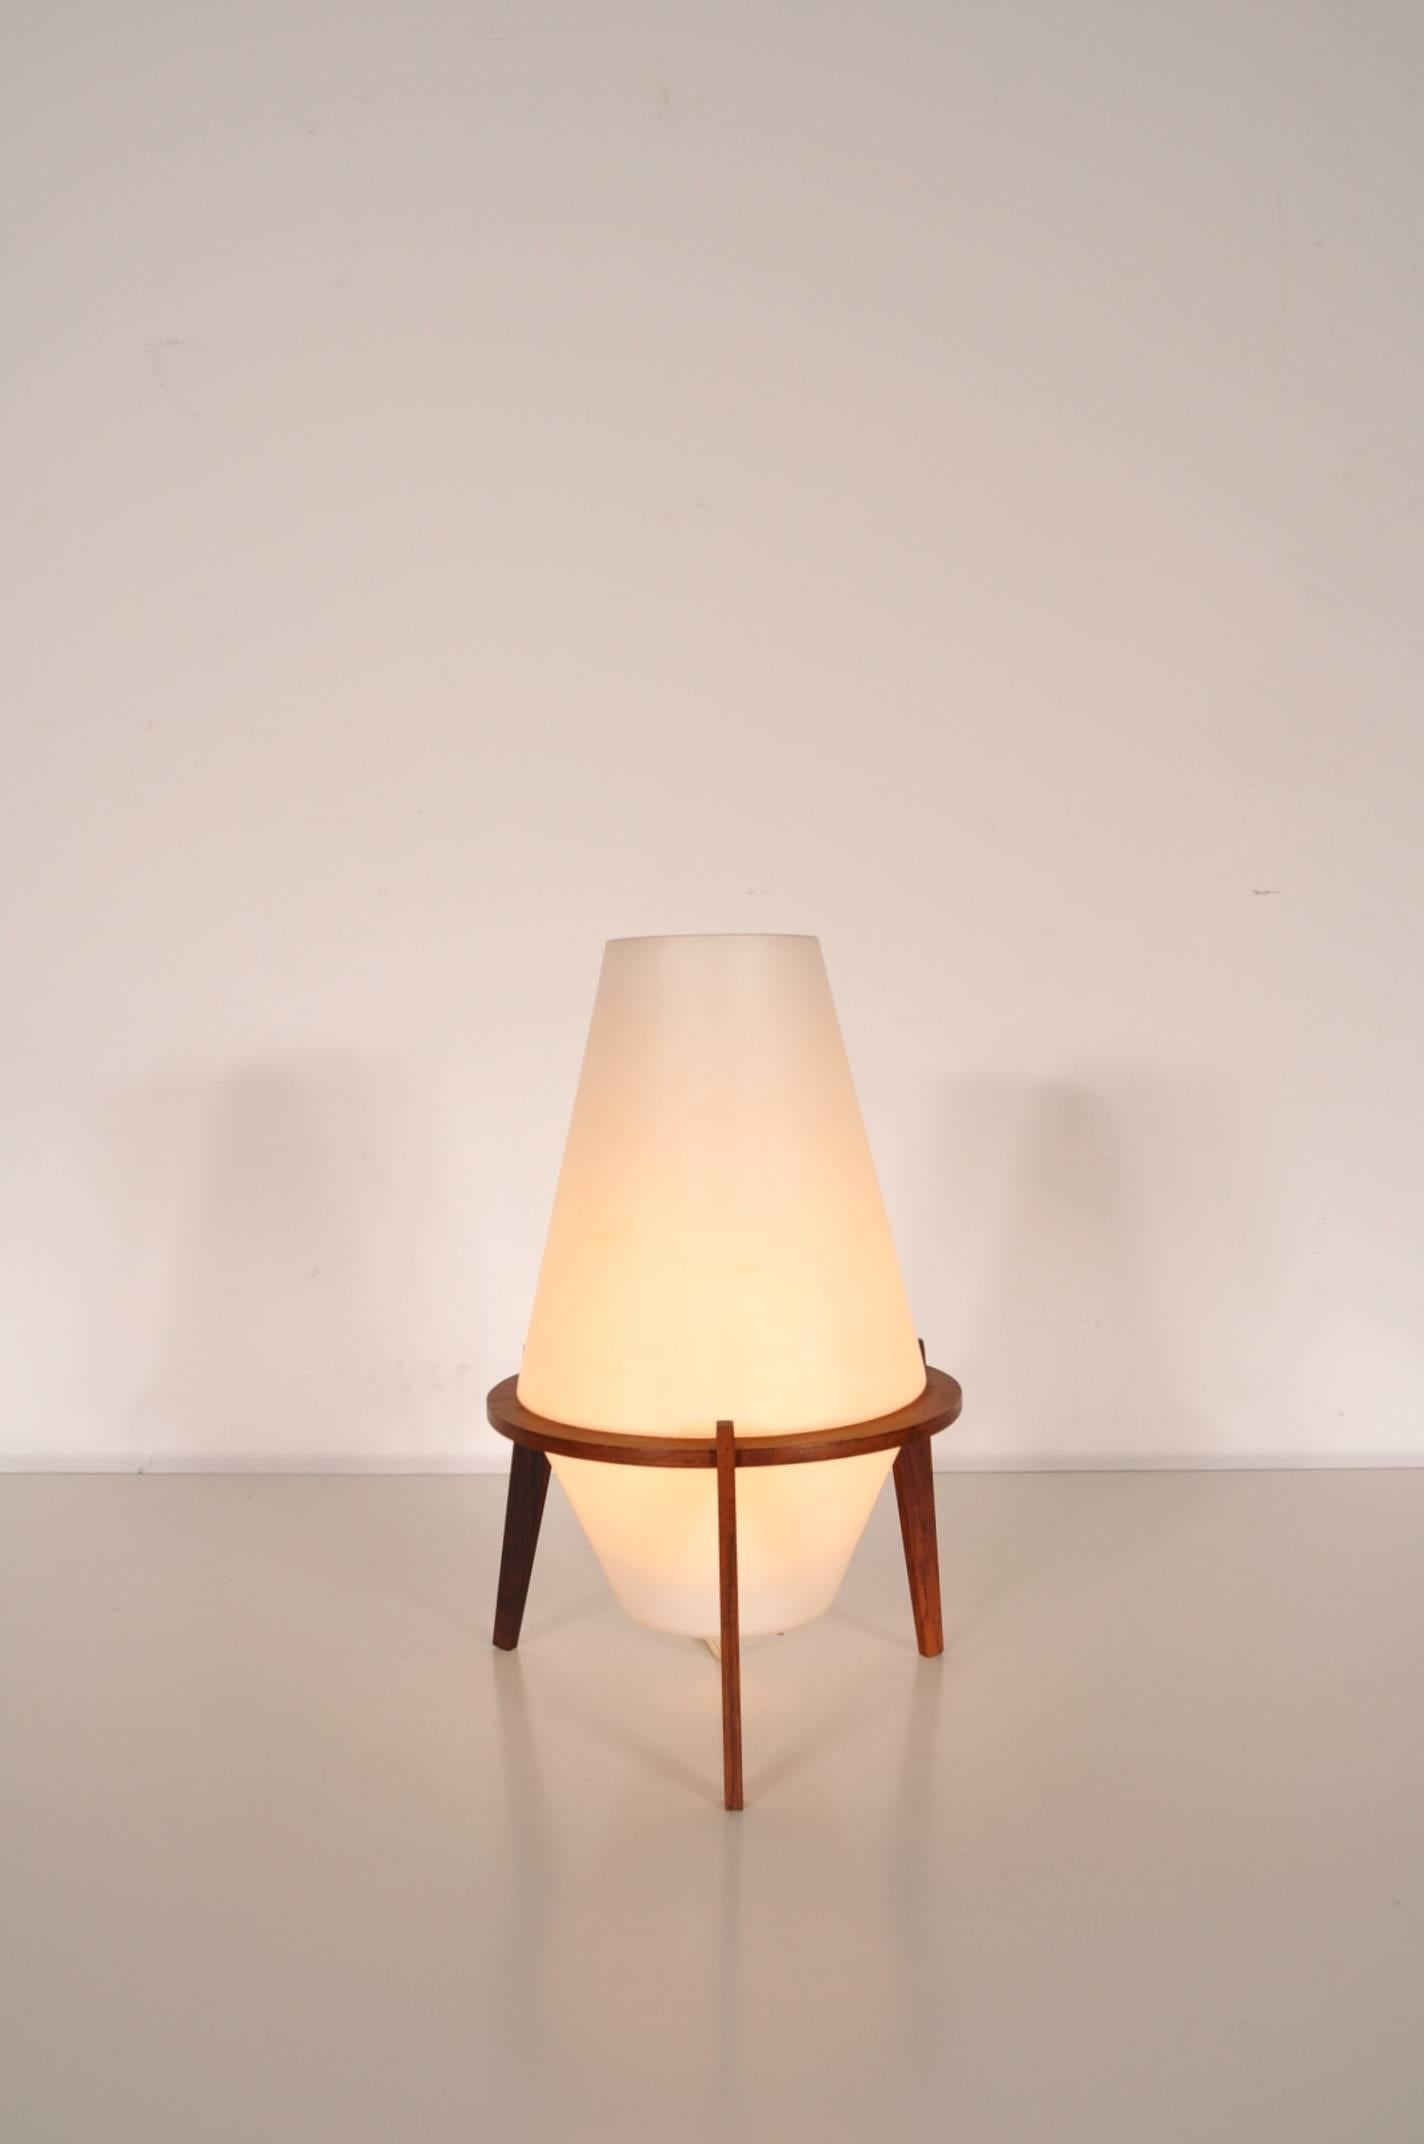 Rare table lamp by Fog & Mørup, manufactured in Denmark around 1950.

It is made of the most beautiful quality milk glass with a teak wooden base. The use of this material, together with it's unique design make it a truly valuable addition to any